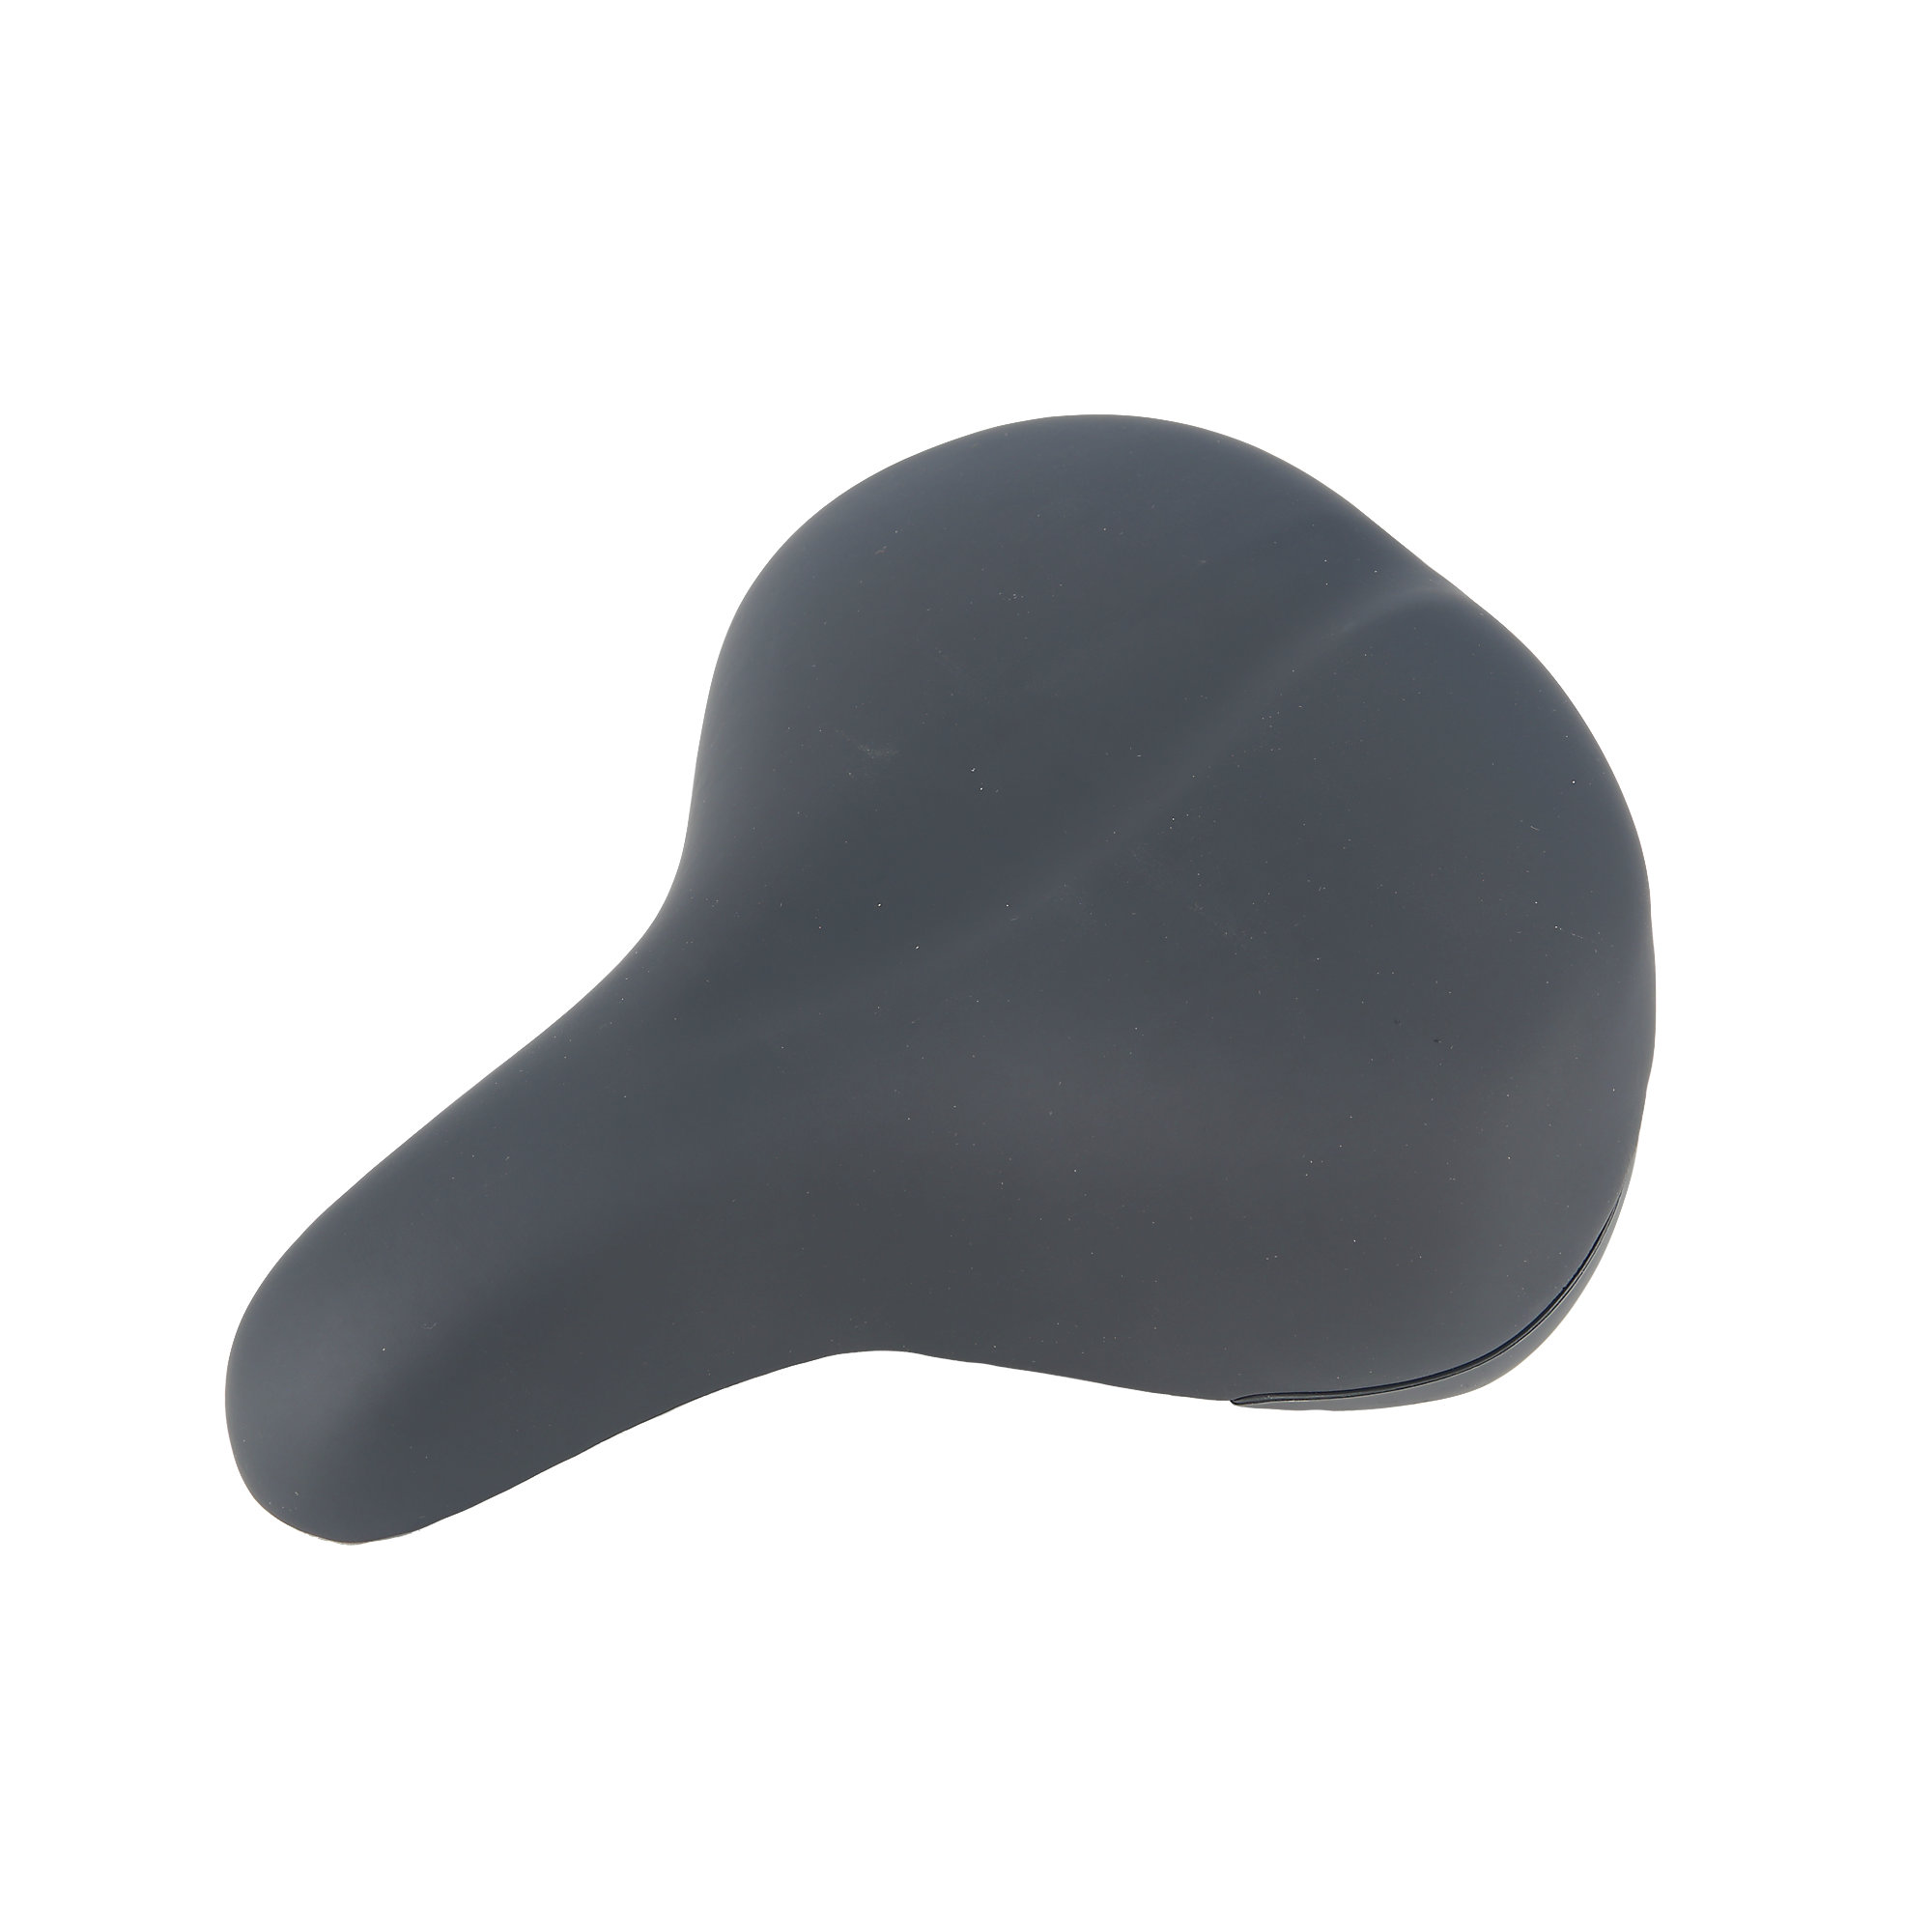 Velo Bike Seat 334168: Eco-Friendly Saddle for City & Indoor Cycling